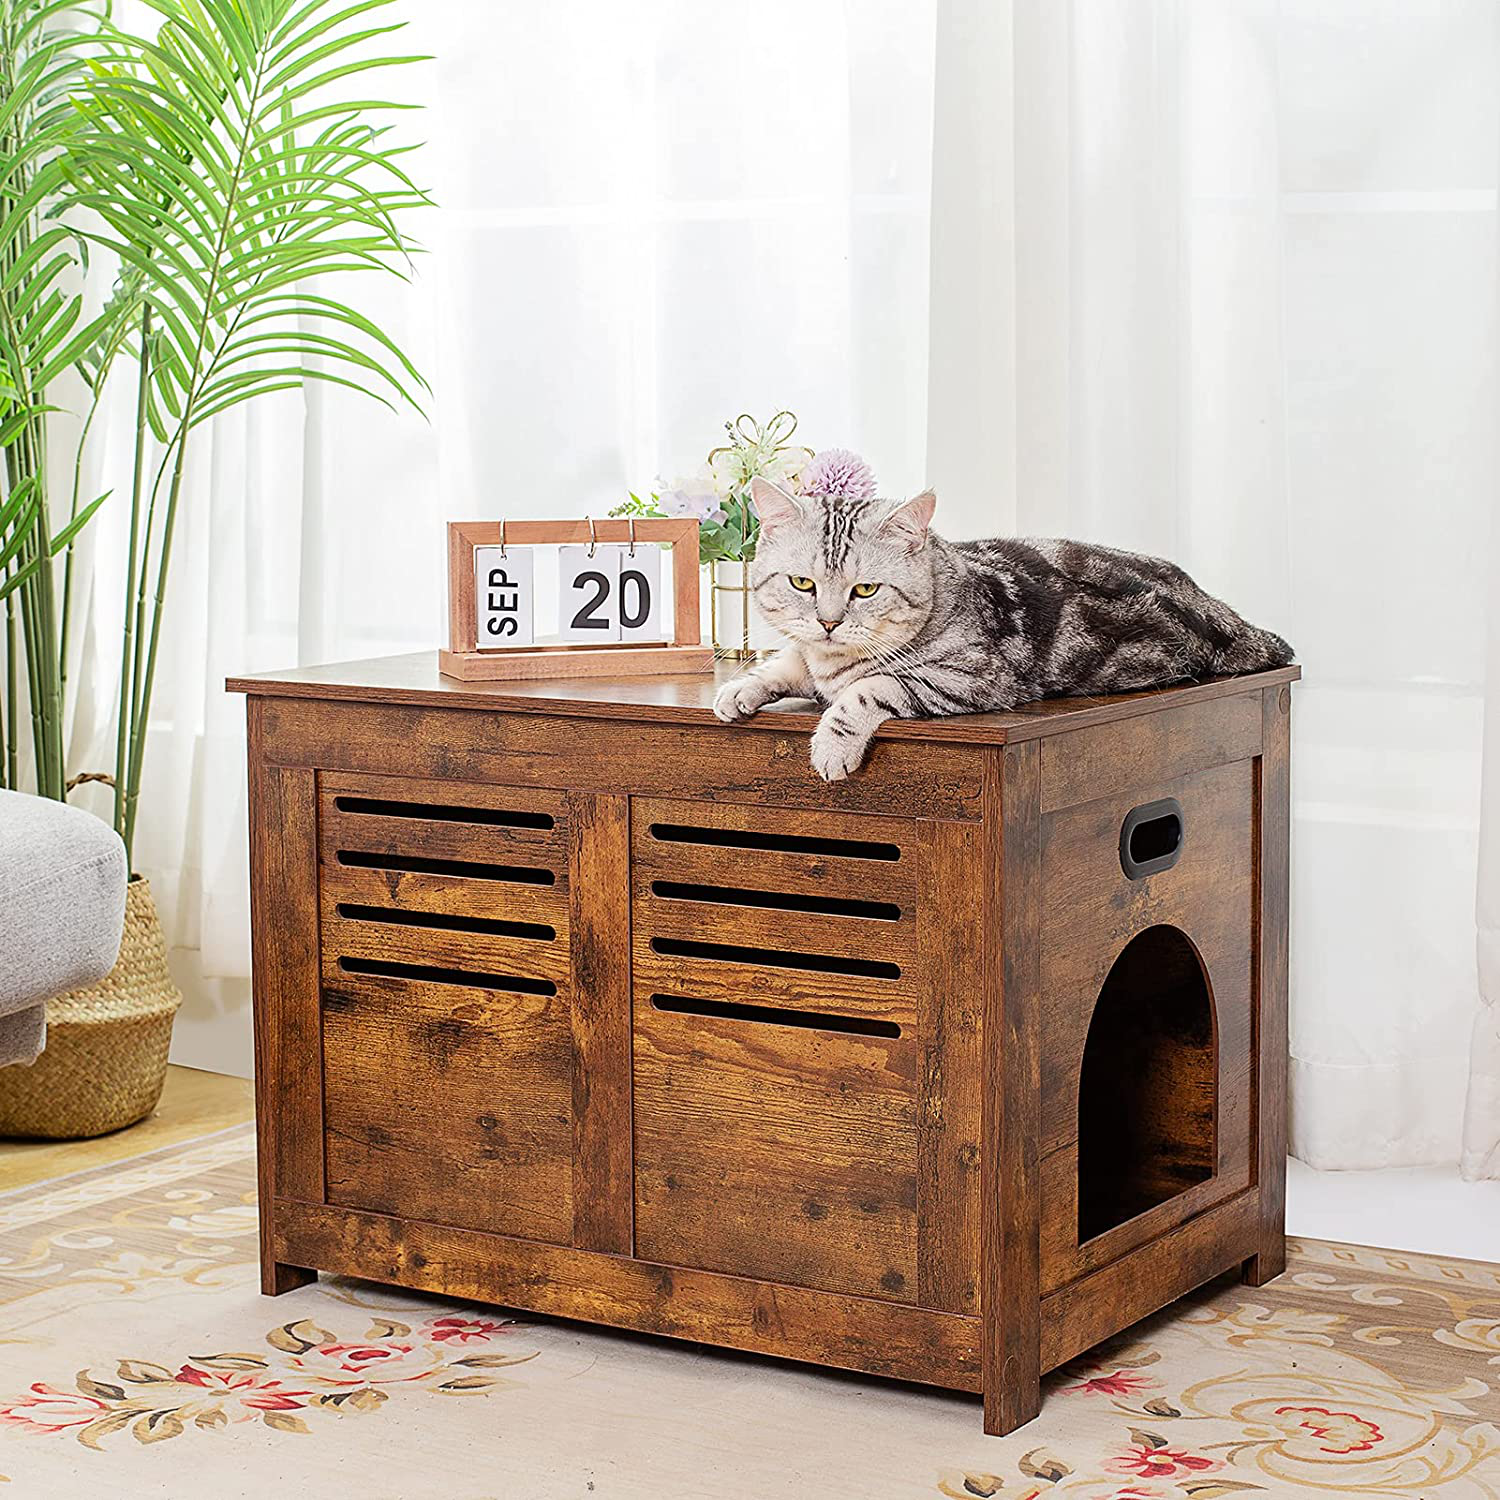 DINZI LVJ Litter Box Enclosure, Cat Litter House with Louvered Doors,  Entrance Can Be on Left or Right Side, Spacious Hidden Cat Washroom for  Most of